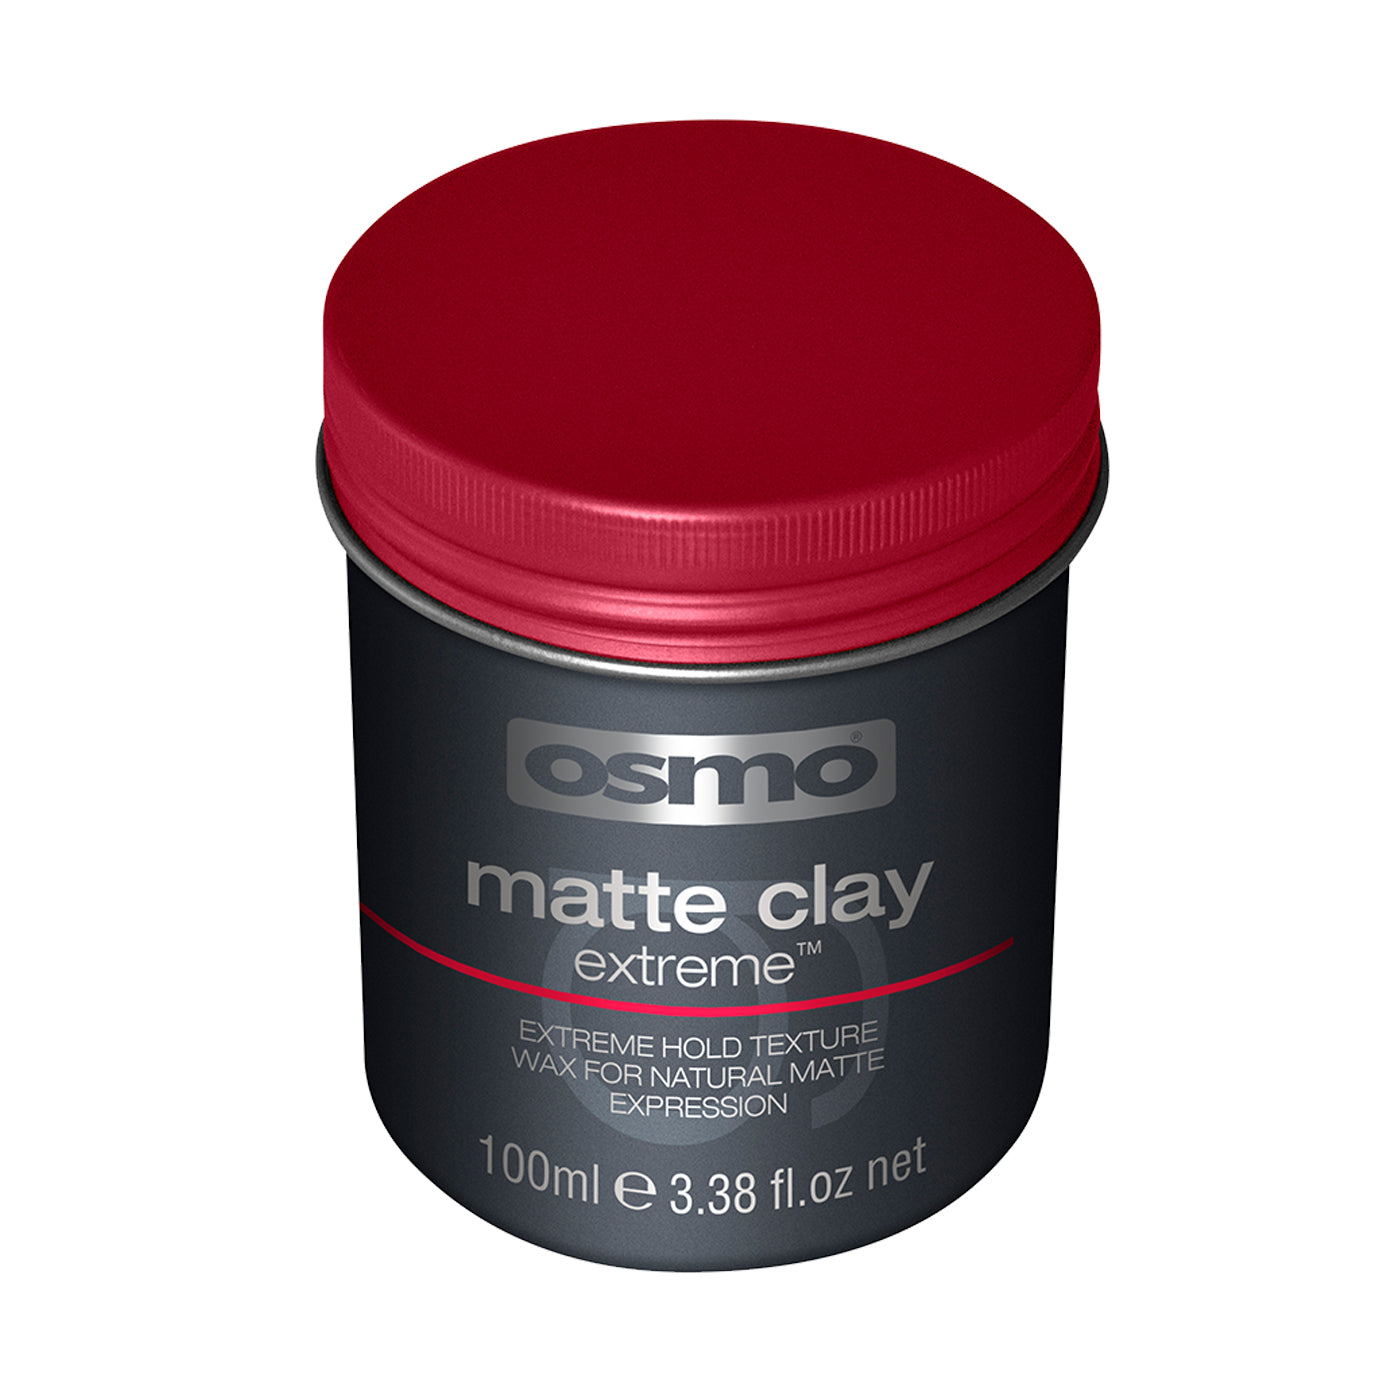 Osmo Matte Clay Extreme (100ml) - Ultimate Hair and Beauty